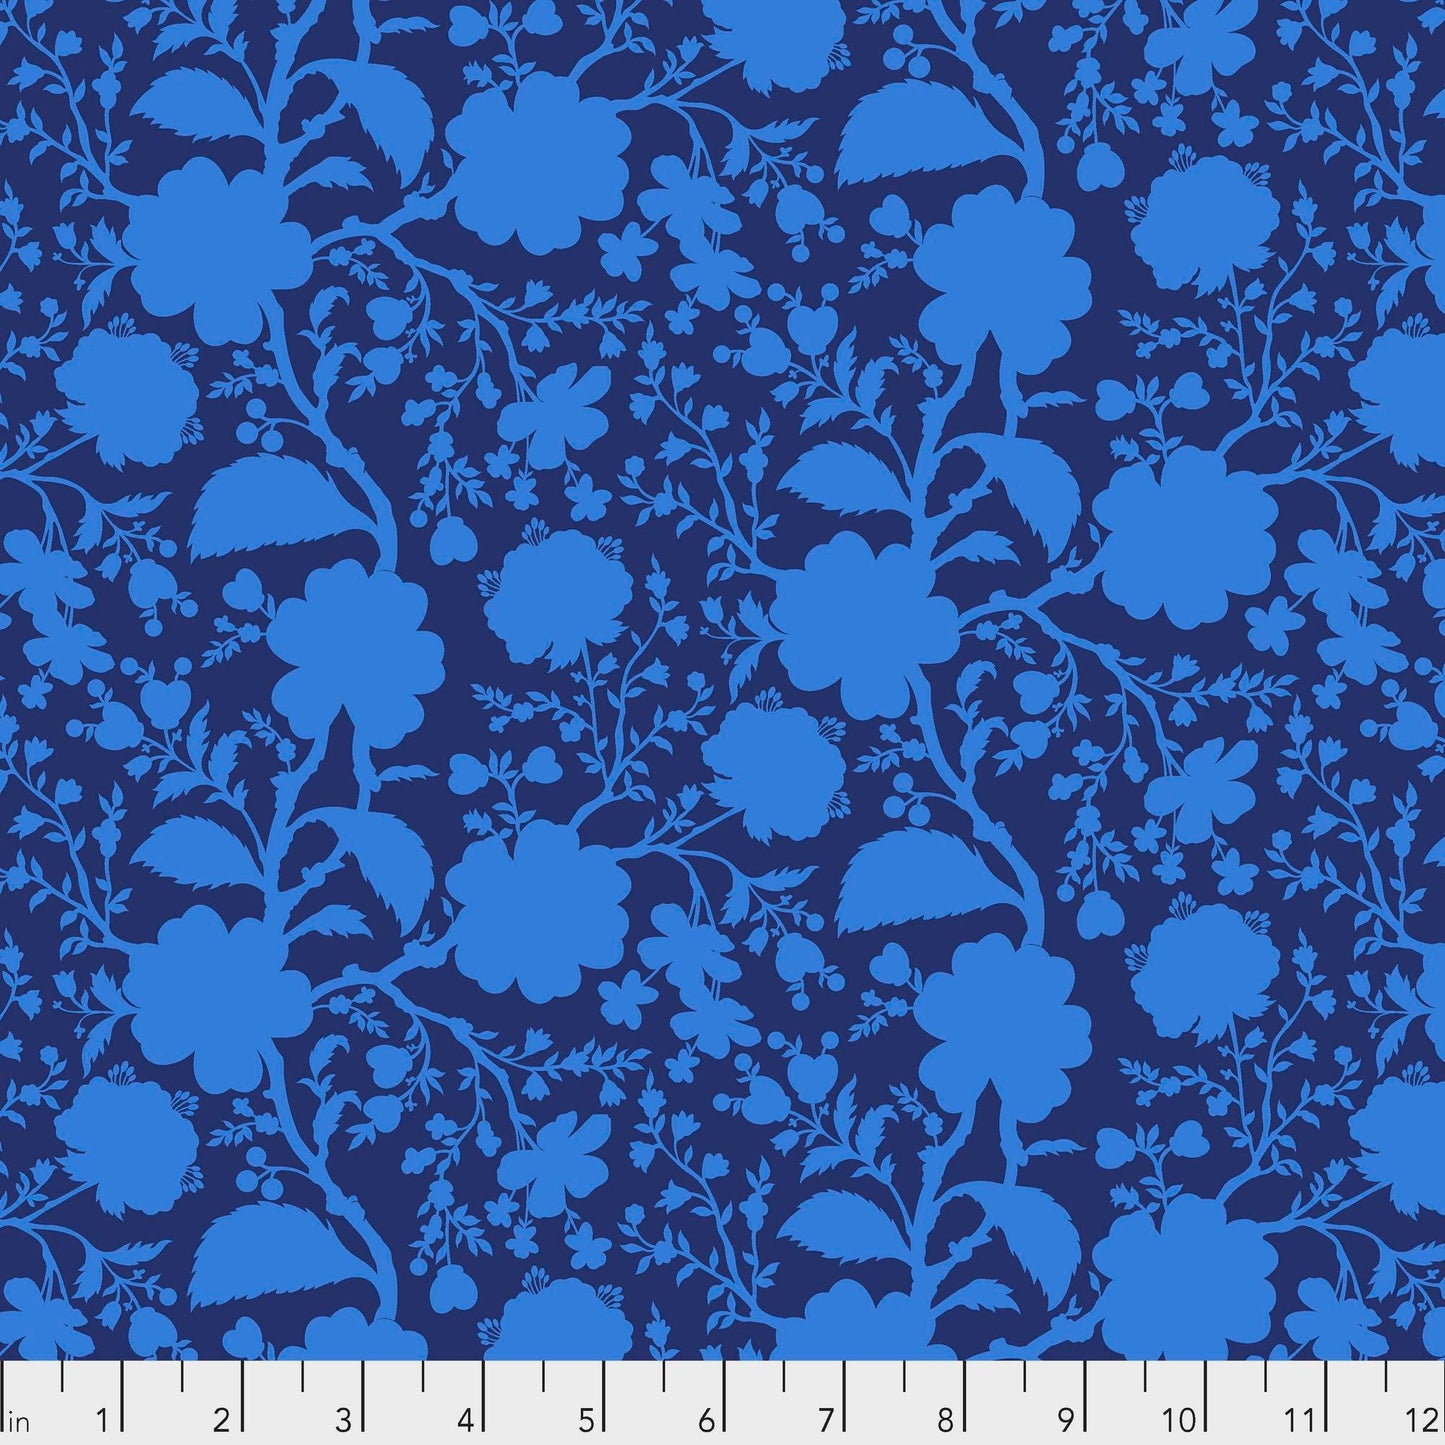 Wildflower in Anemone PWTP149 Tula Pink Fabric, Free Spirit Fabric, Blue Floral Fabric, Quilt Fabric, Cotton Fabric, Fabric By The Yard